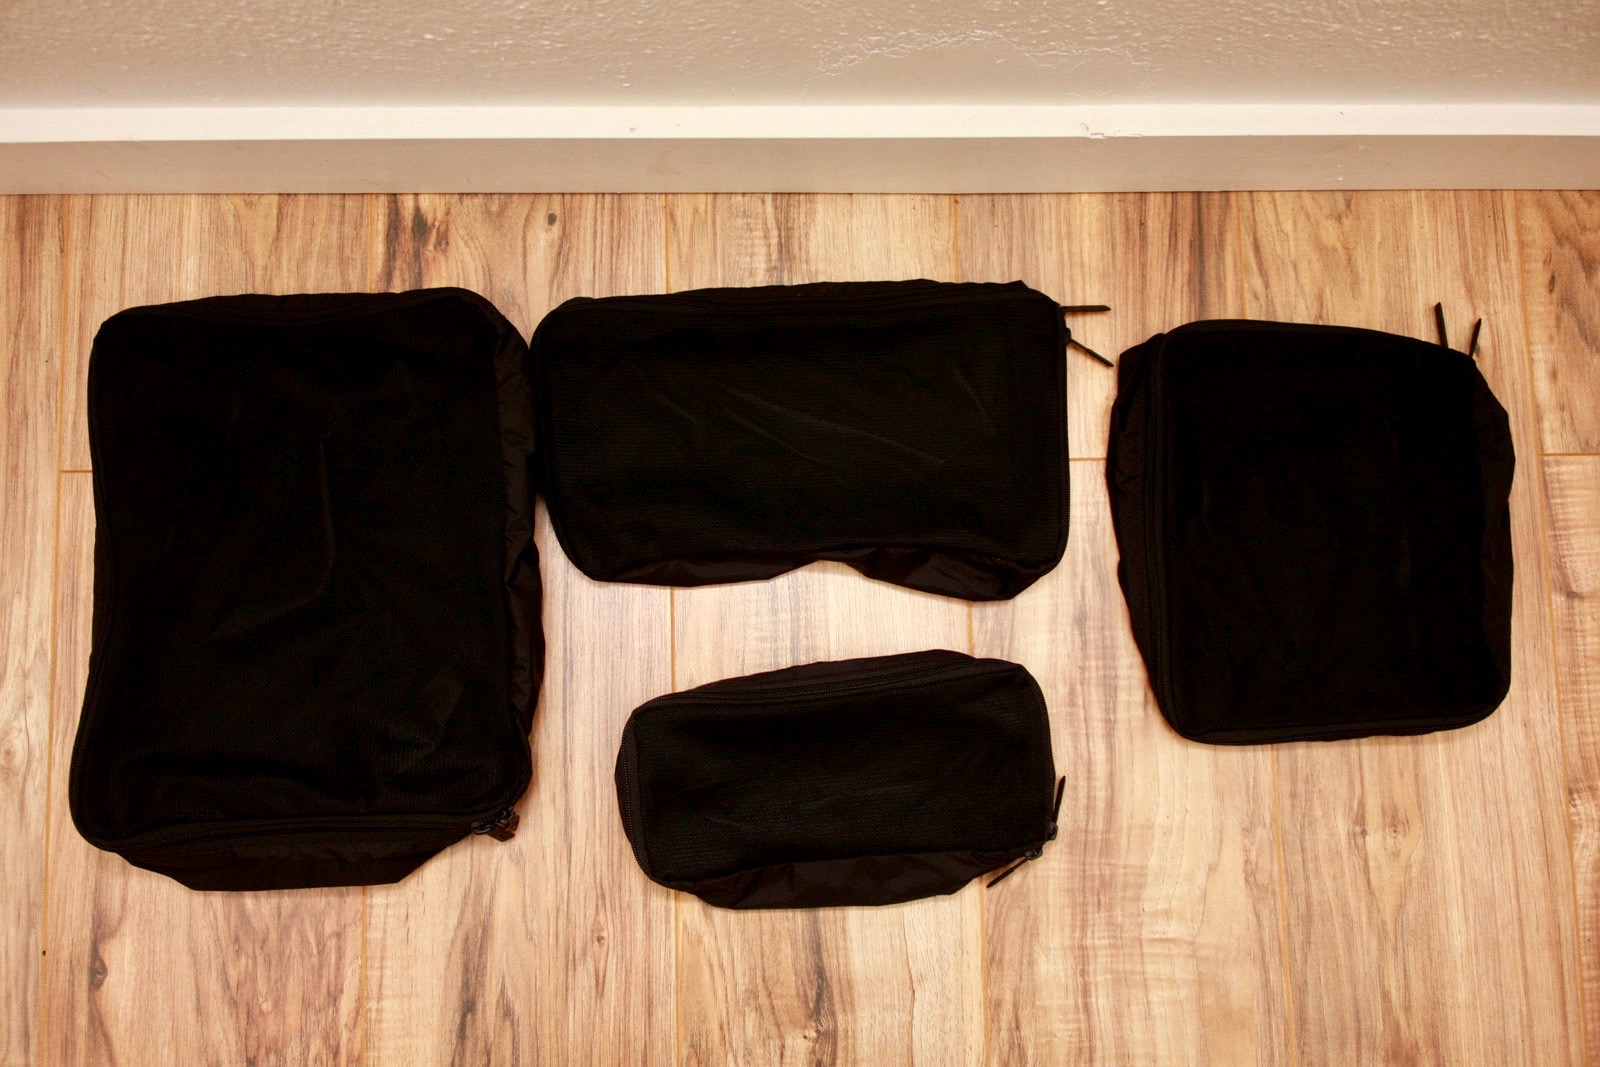 A set of four empty Away Packing Cubes